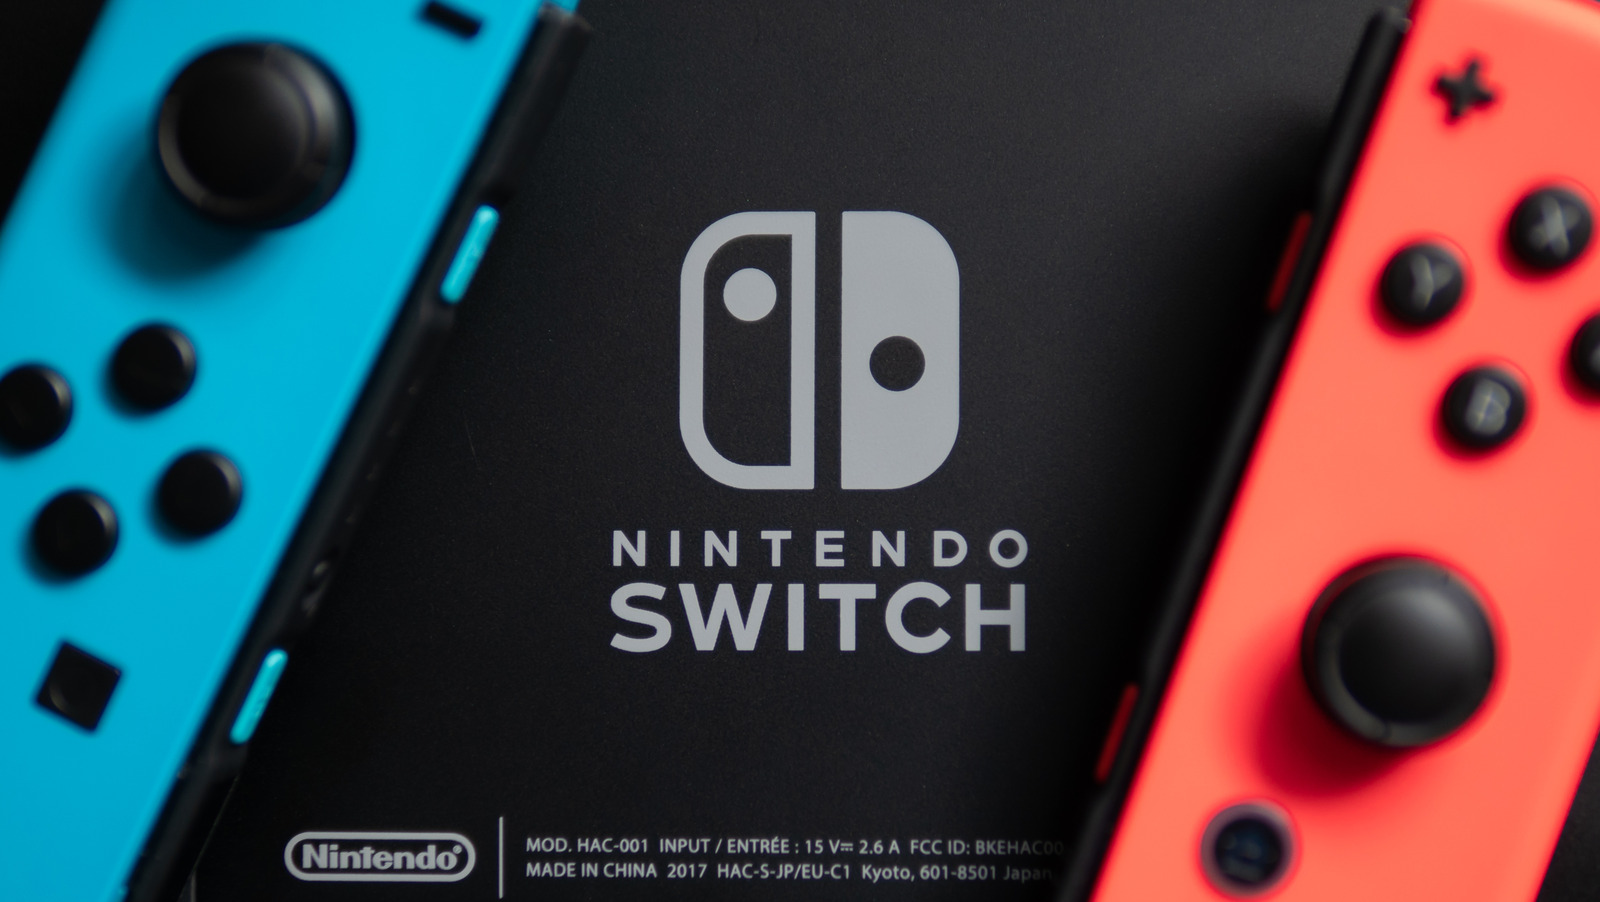 Switch free games warning: Nintendo fans can download THIS super